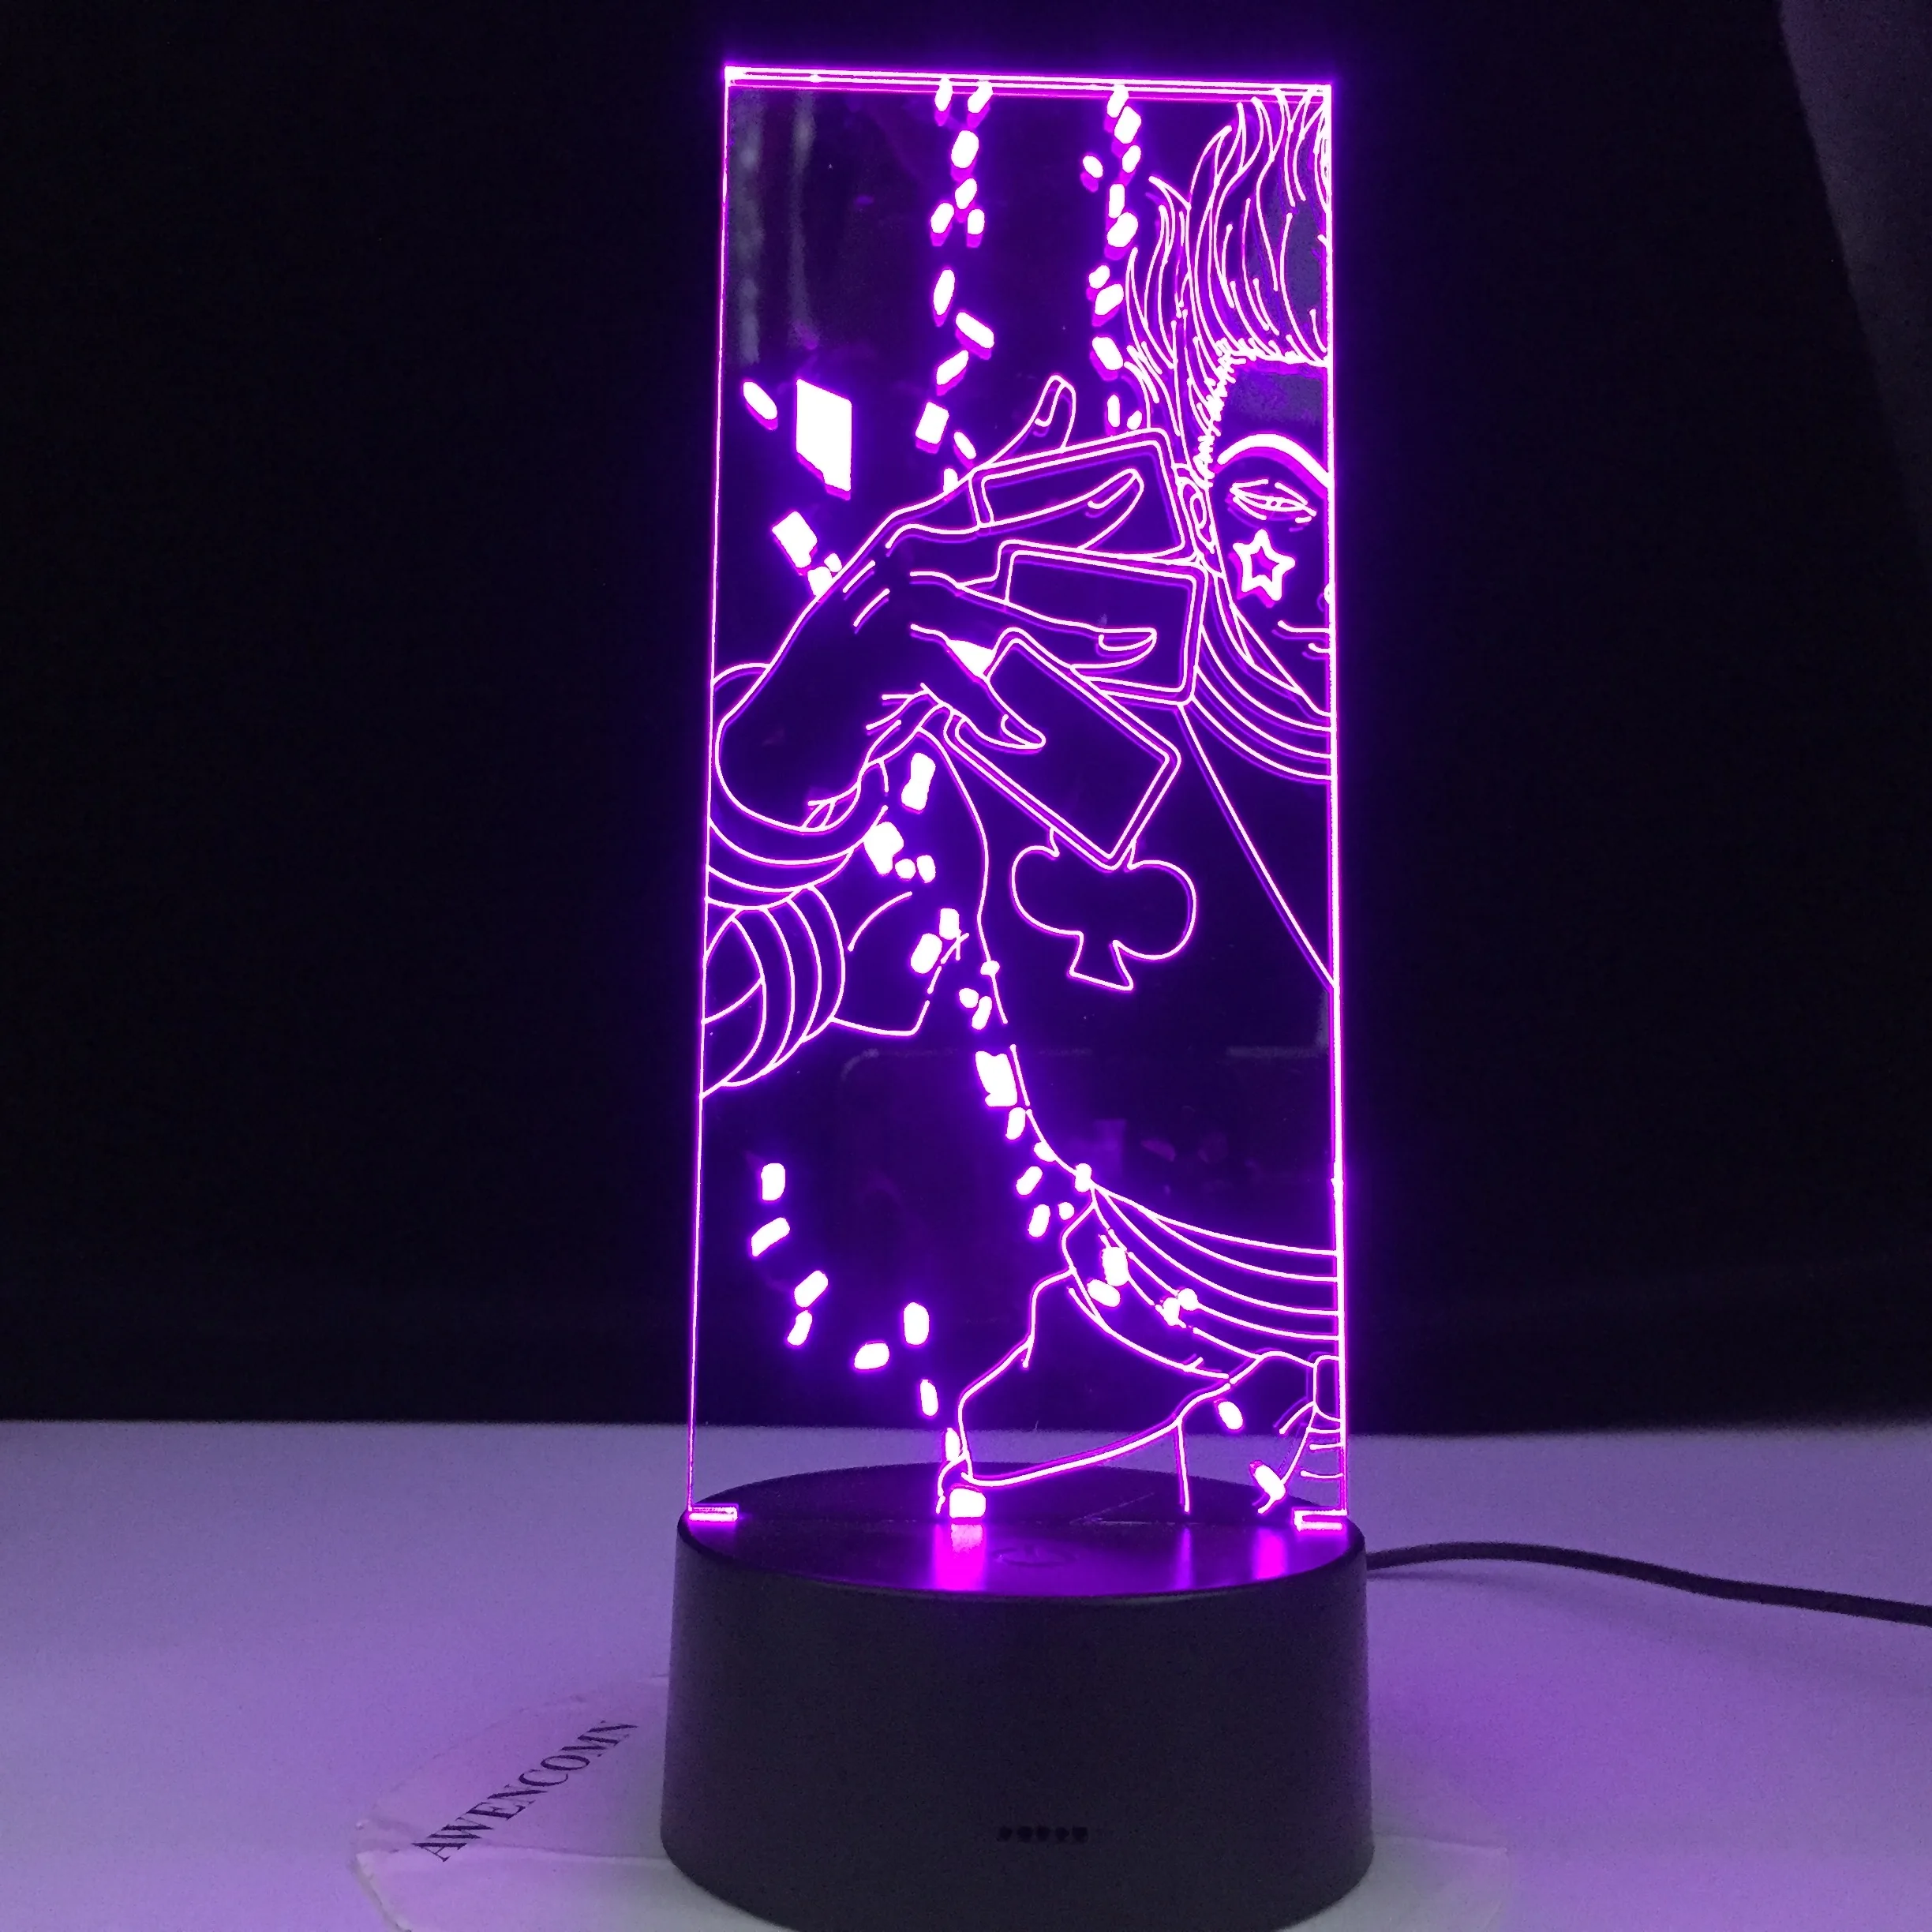 Details about   Acrylic 3d Night Light Led Color Changing Nightlight  Anime Hunter Hisoka L Hw 